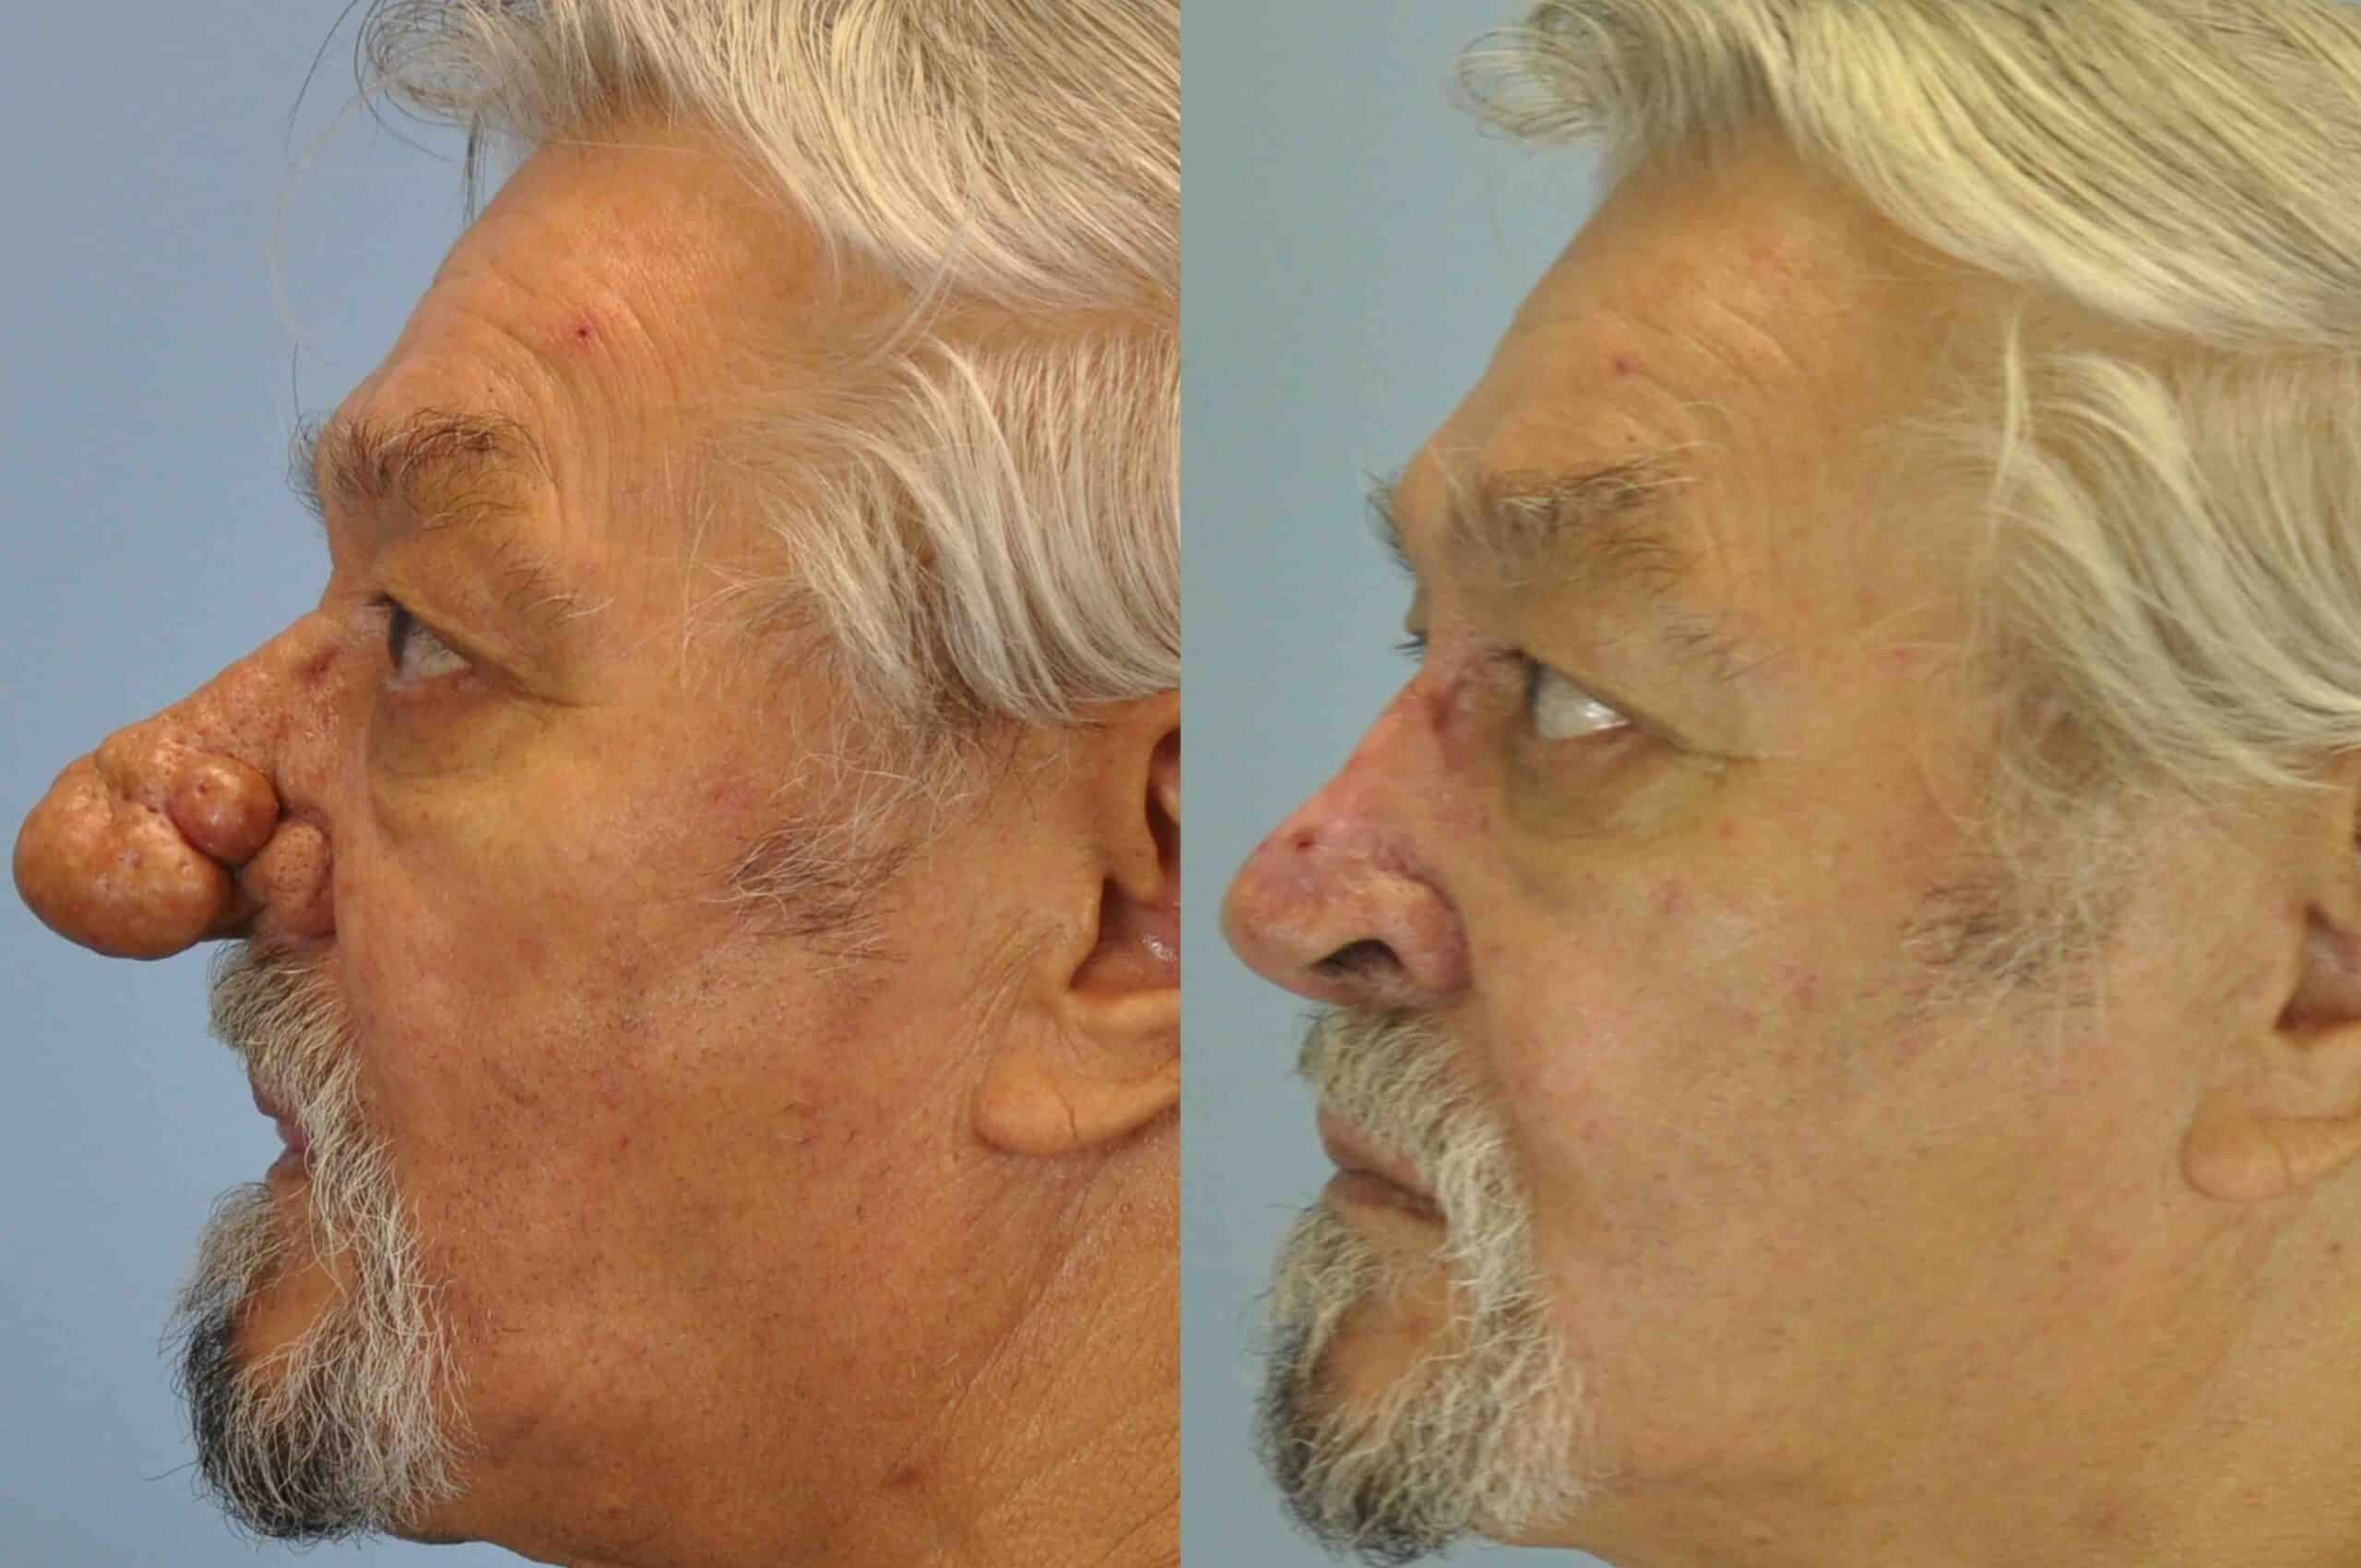 Before and after, 11 mo post op from Rhinoplasty, Rhinophyma performed by Dr. Paul Vanek